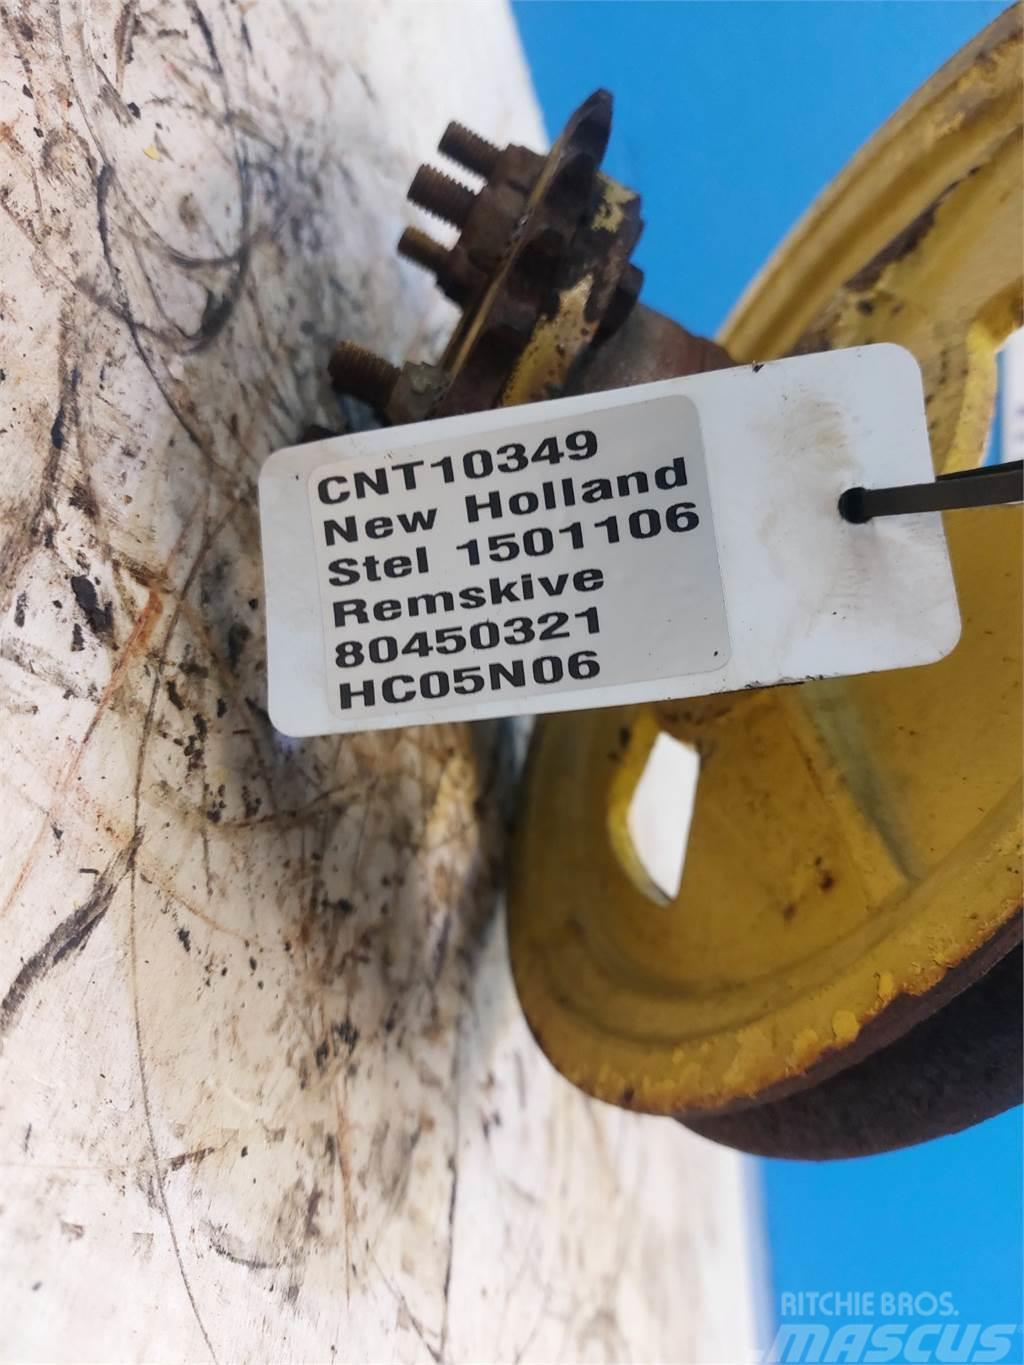 New Holland 1520 Combine harvester accessories